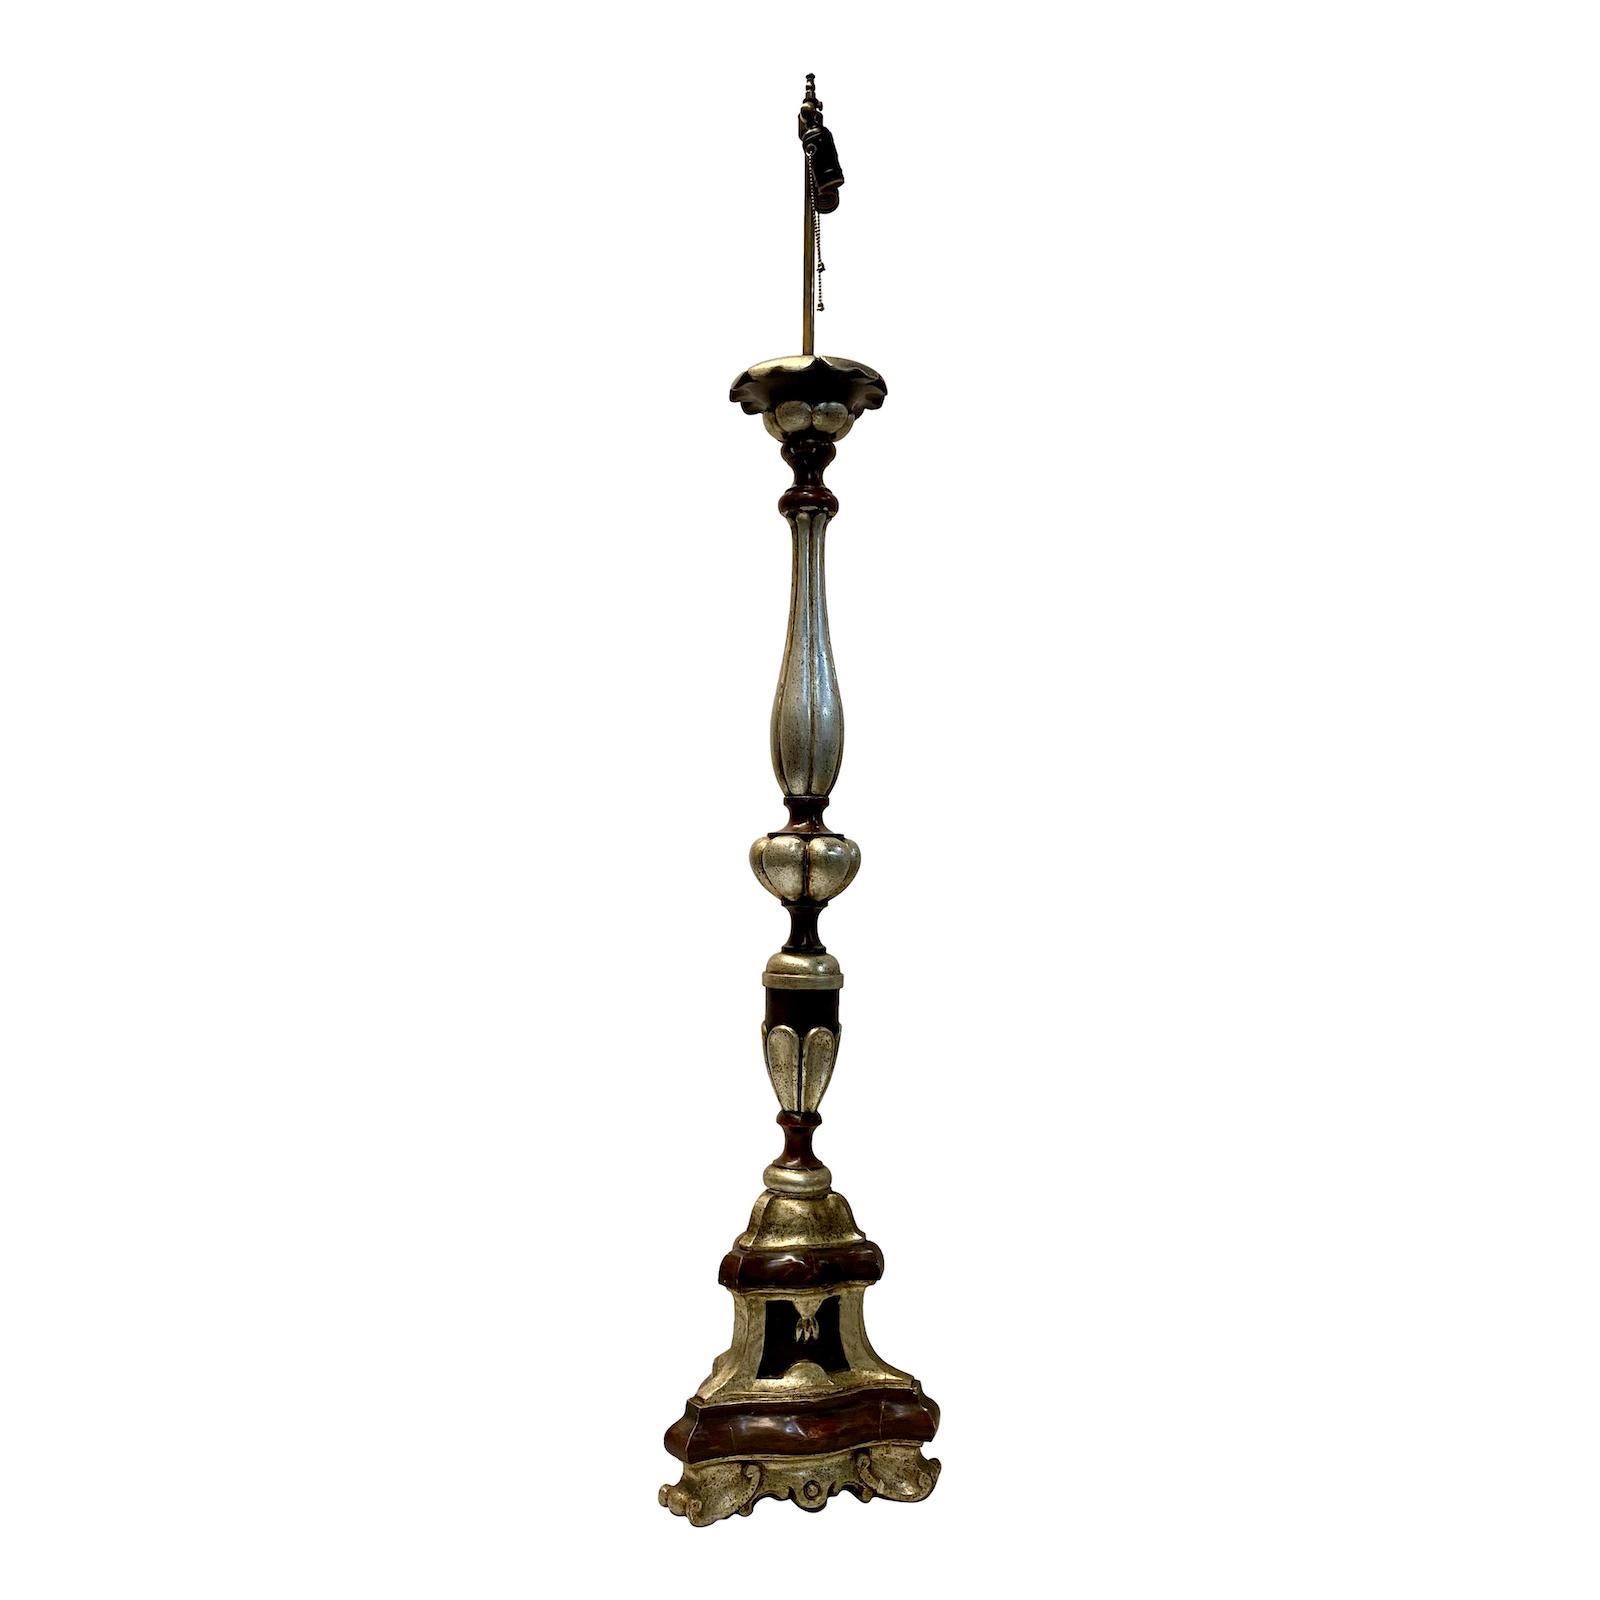 A single circa 1920's Italian carved wood floor lamp with painted silver finish.

Measurements:
Height of body: 50.25